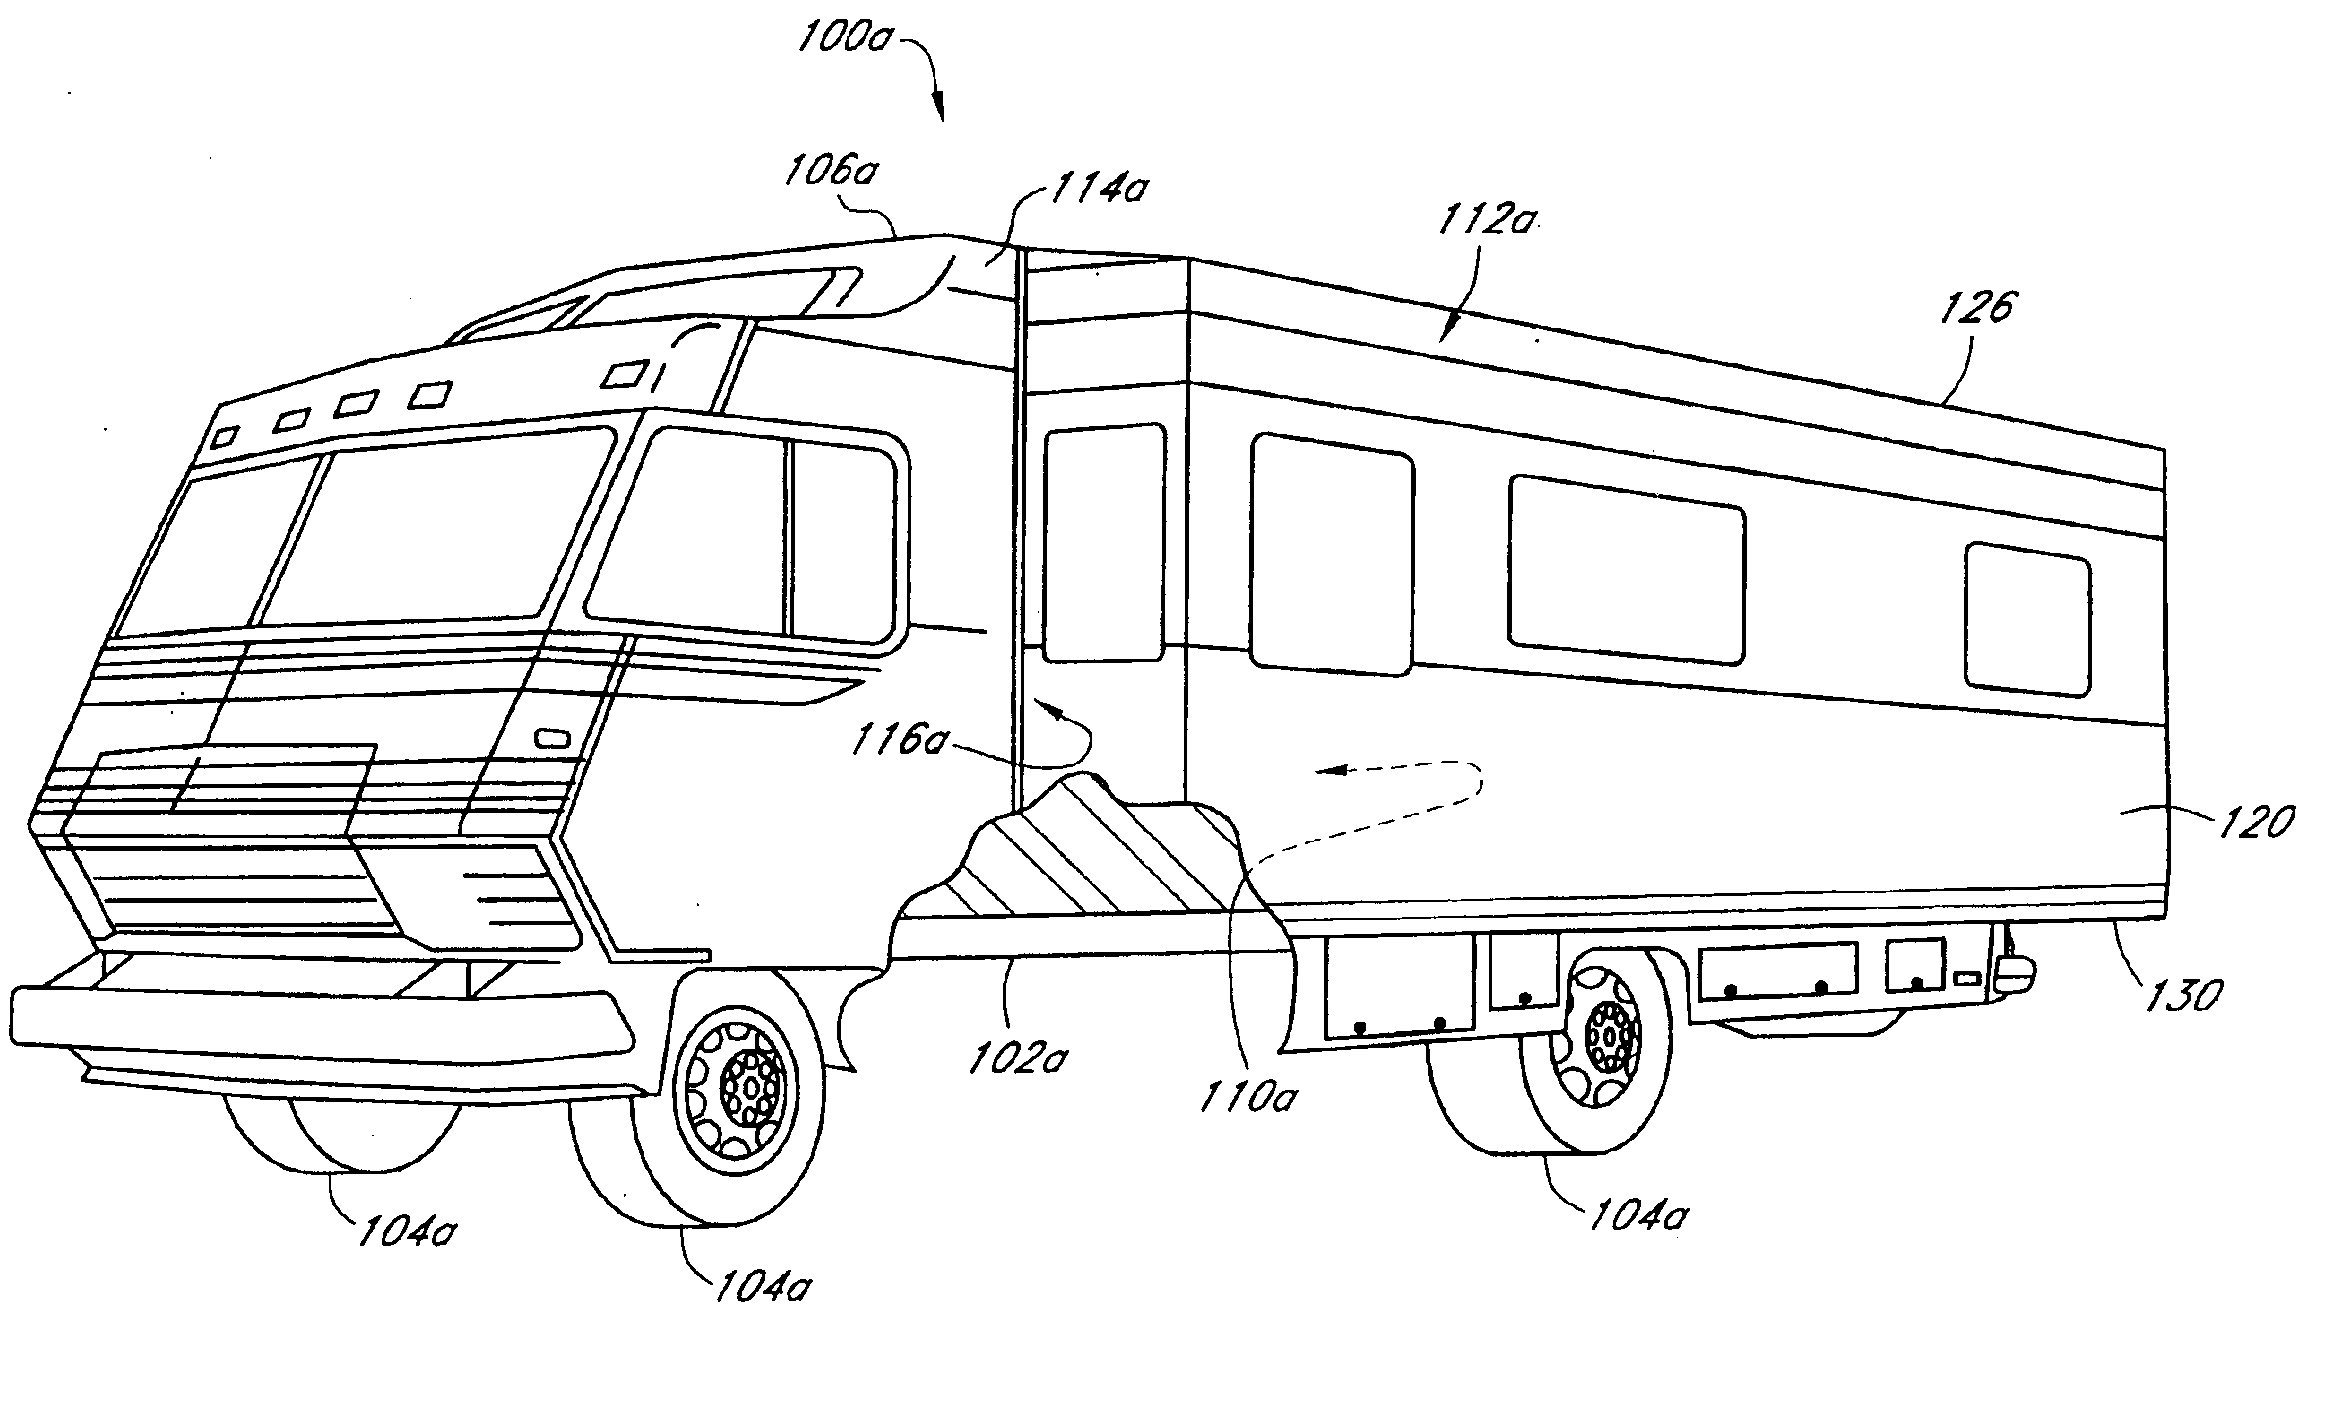 Securing mechanism for recreational vehicle slide outs